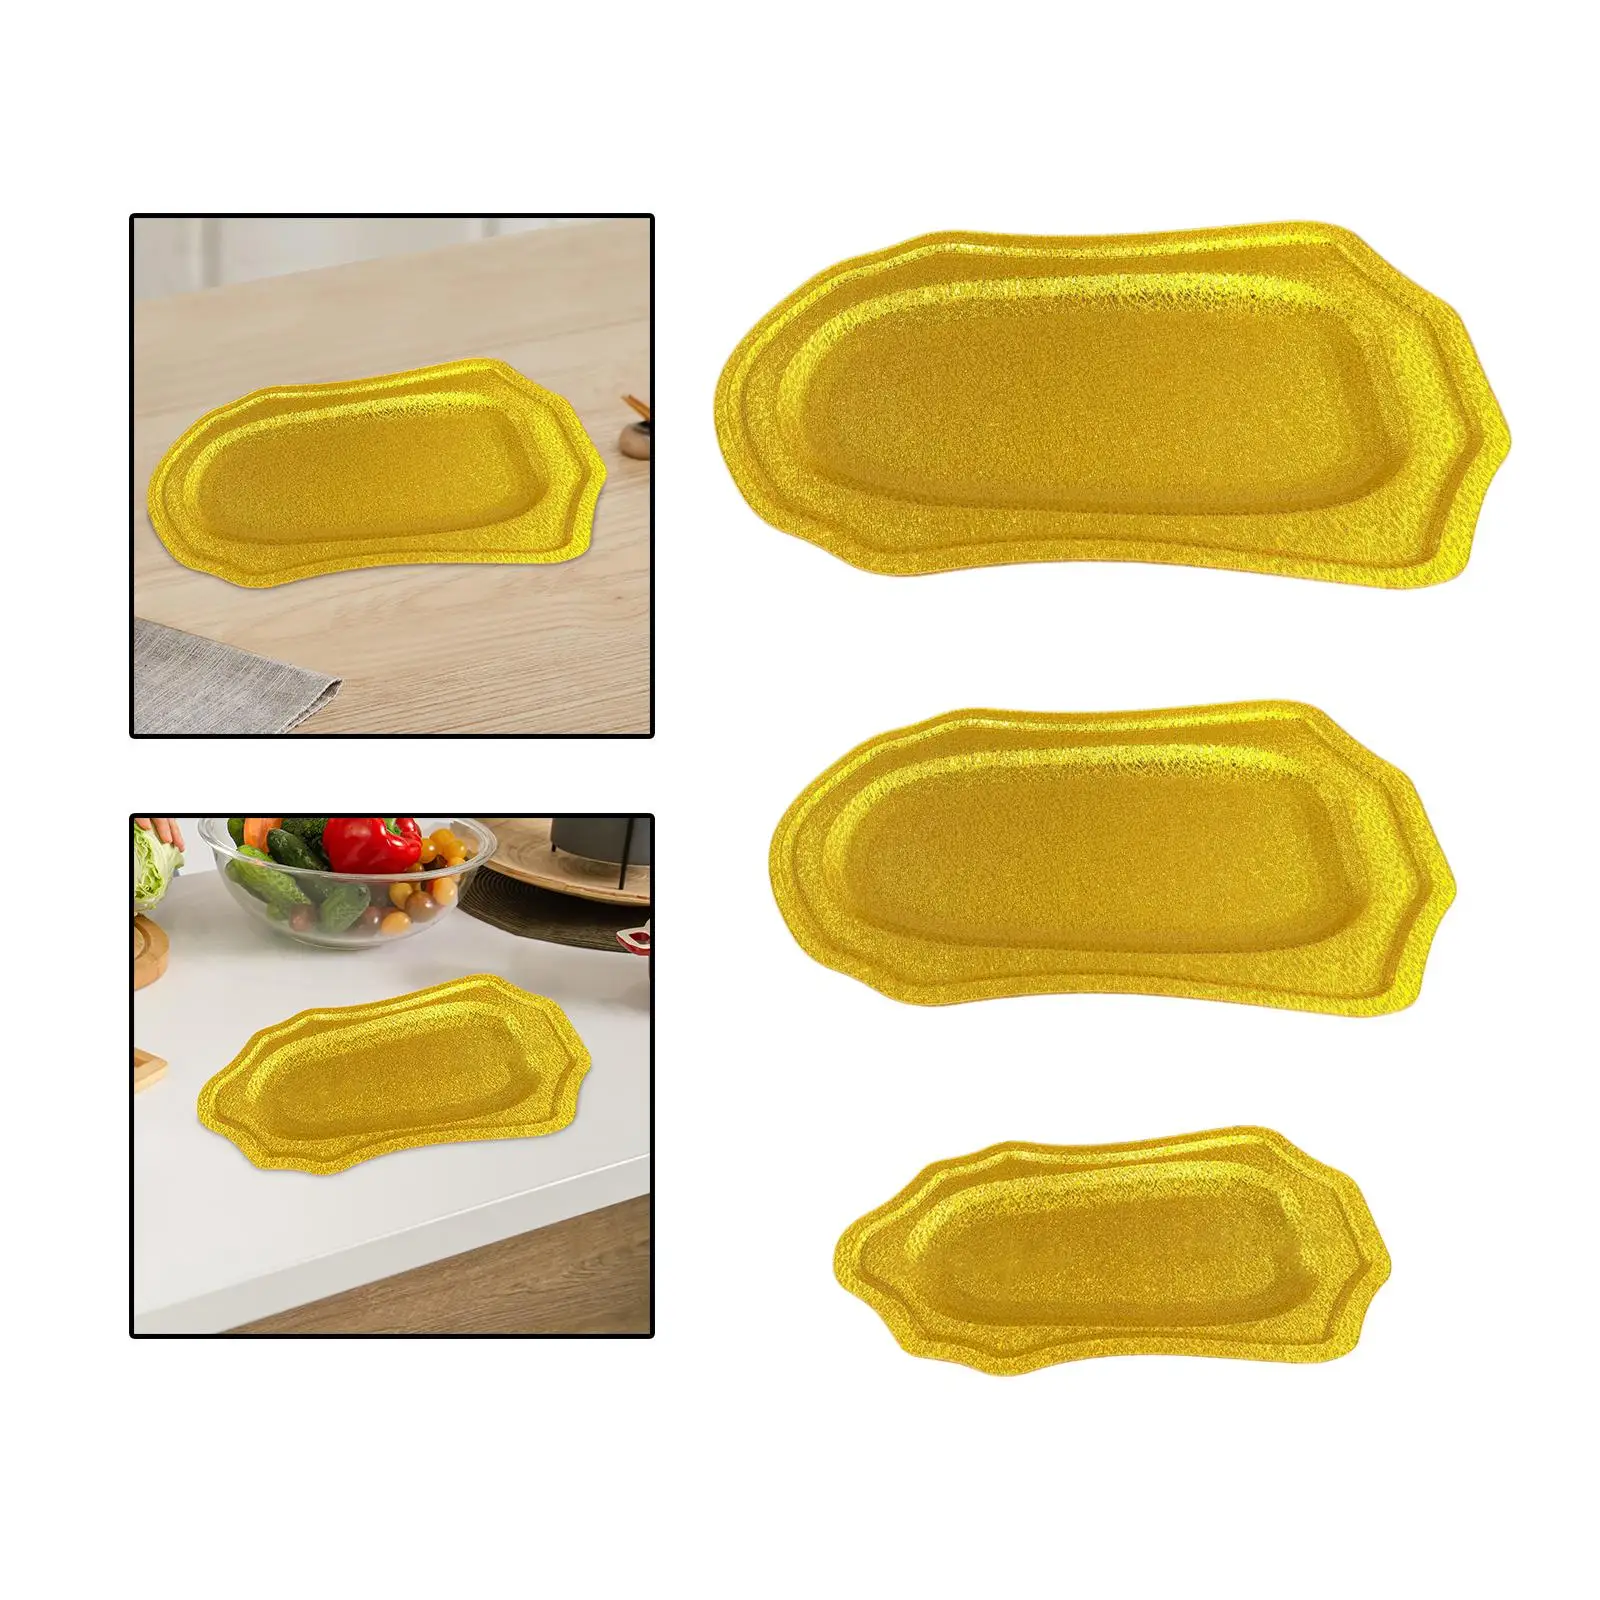 Salad Plate Reusable Kitchen Dinnerware Storage Tray Food Serving Plate Fruit Tray for Dinner Cookies Appetizer Party Outdoor